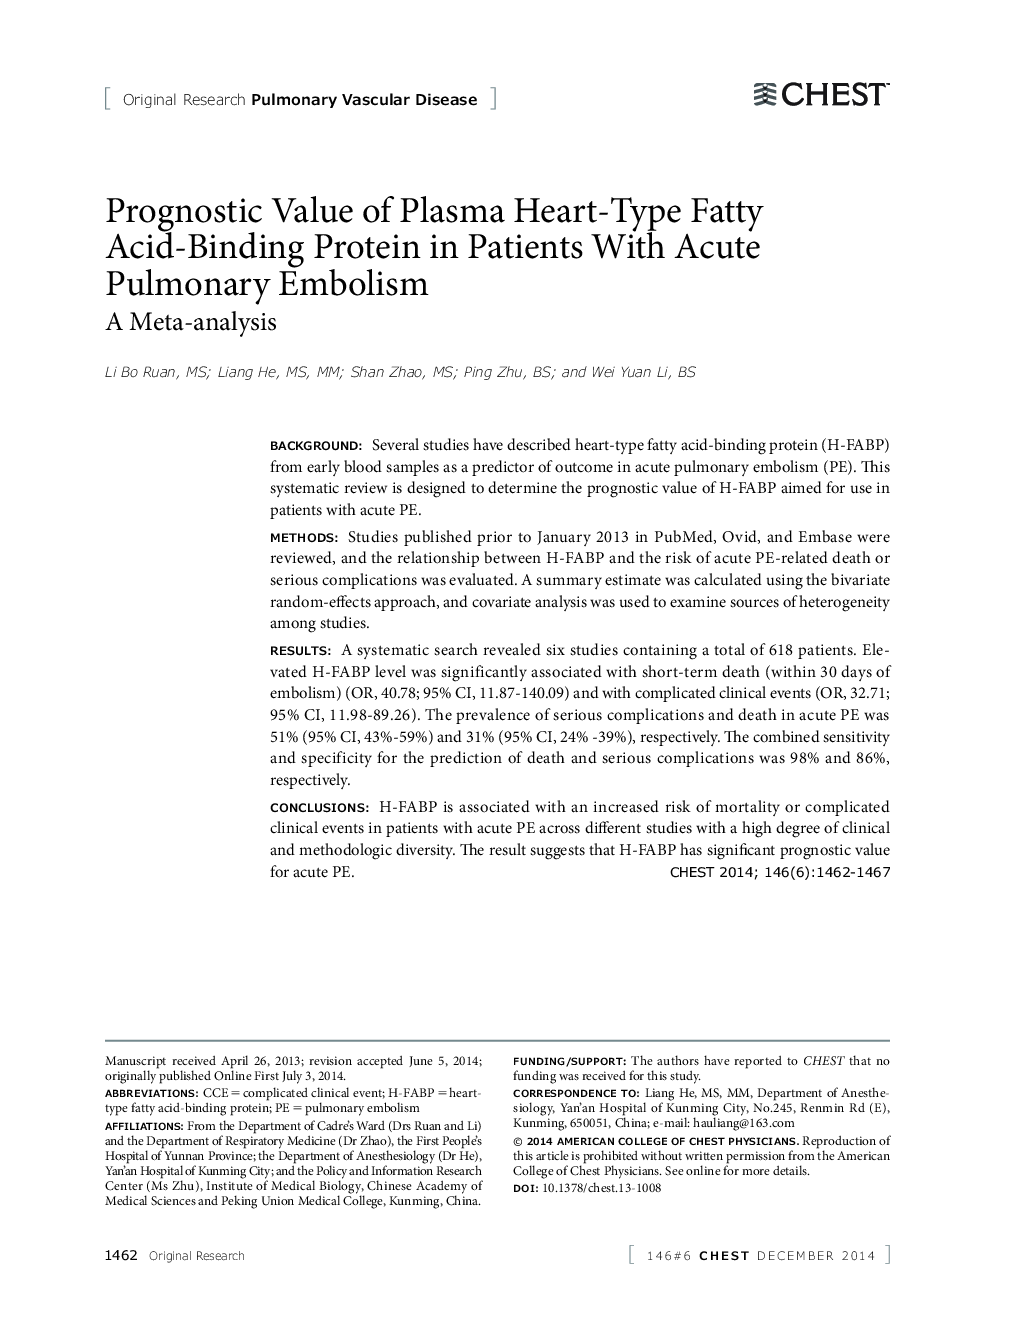 Prognostic Value of Plasma Heart-Type Fatty Acid-Binding Protein in Patients With Acute Pulmonary Embolism